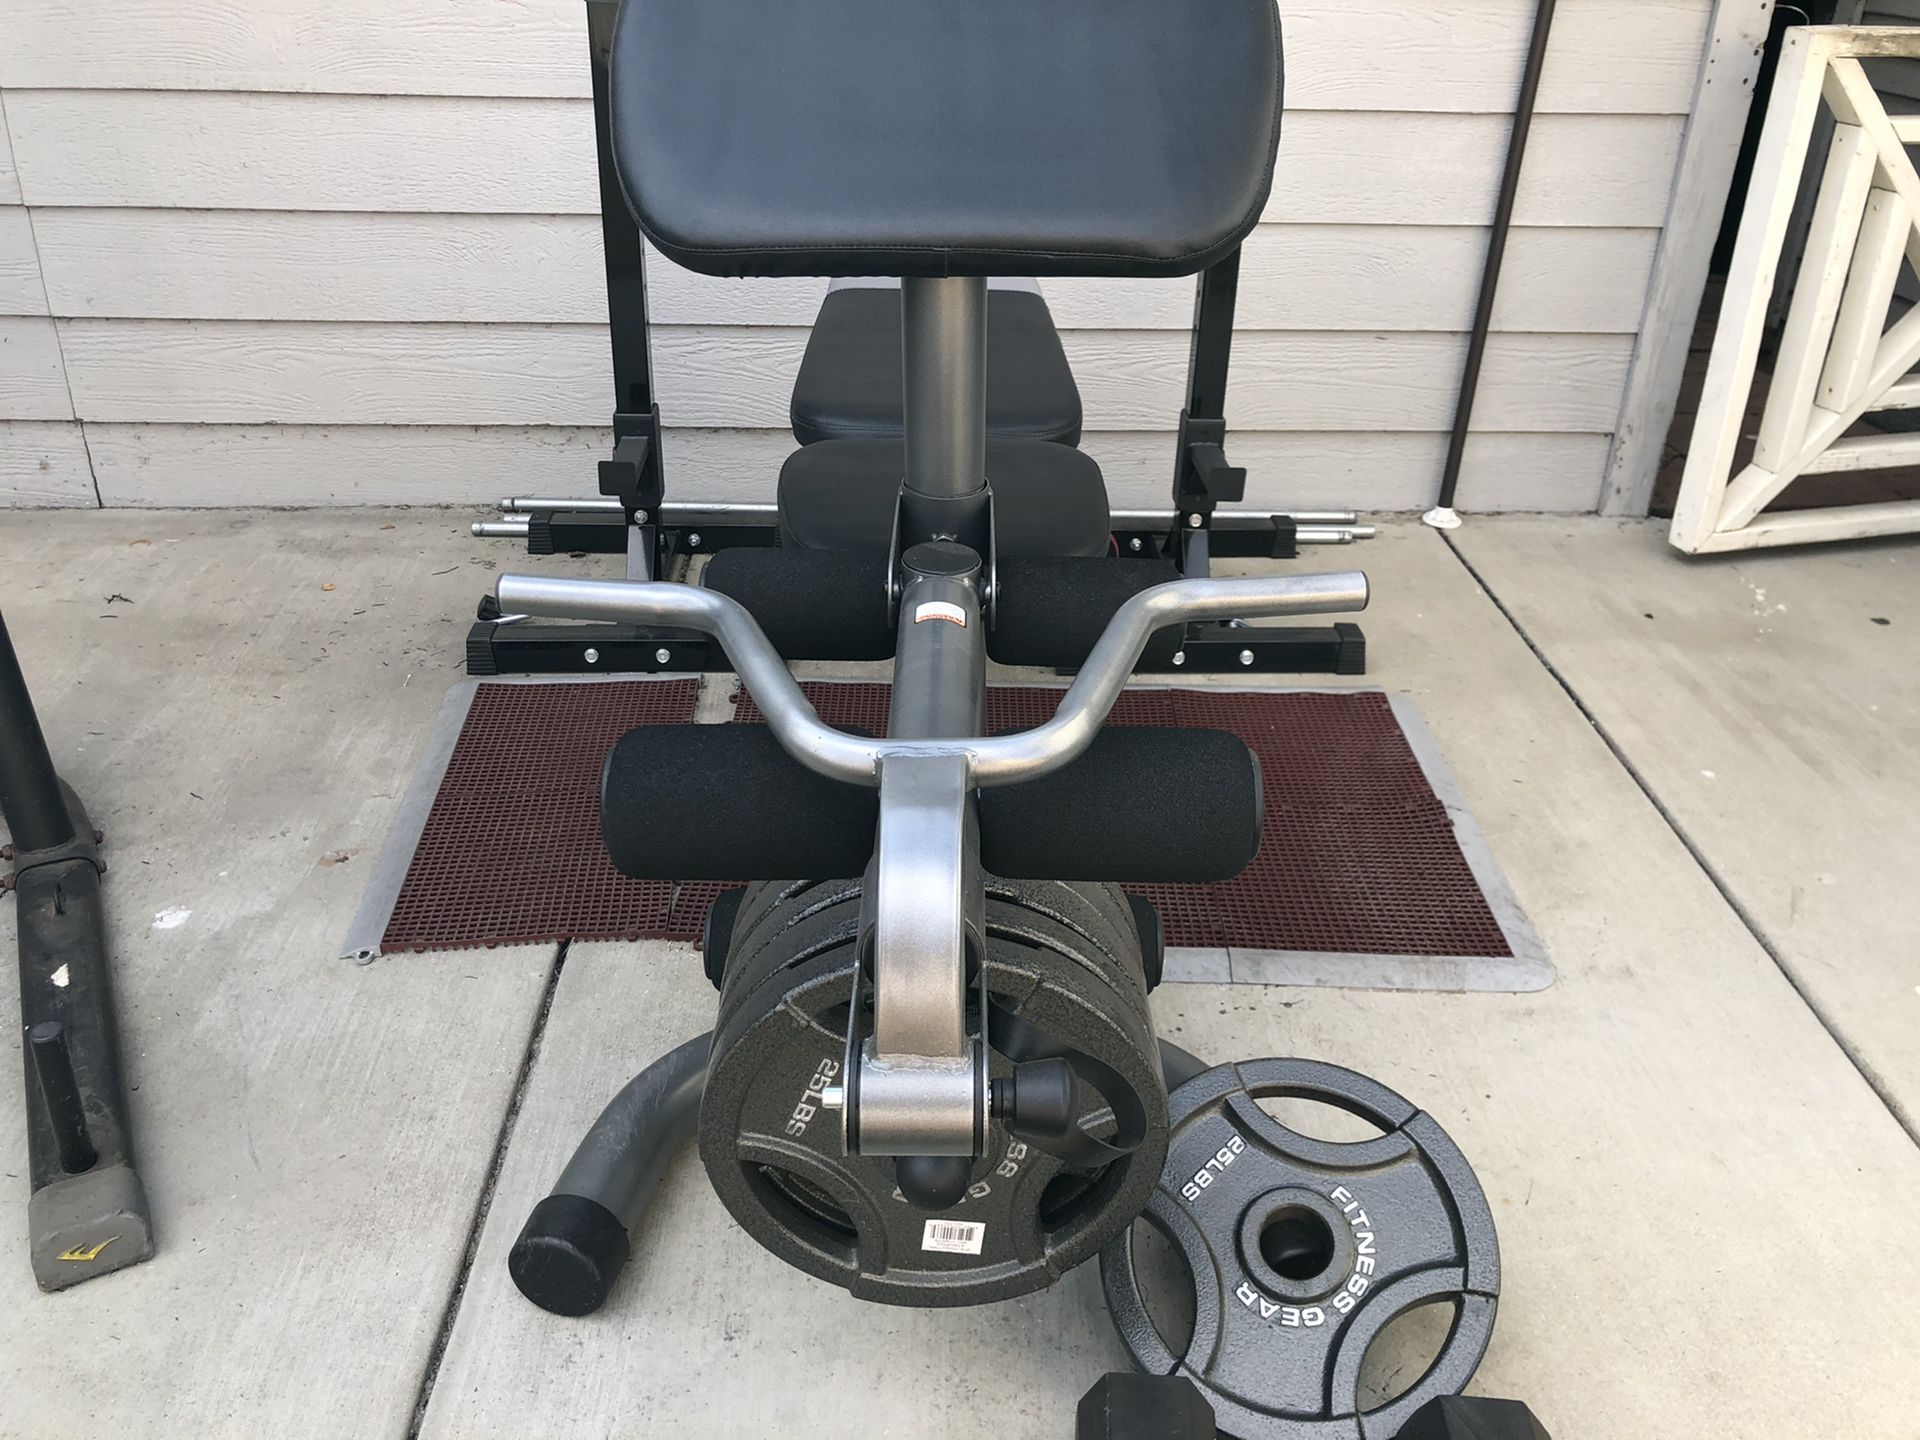 Work out station with weights and boxing for $750!!